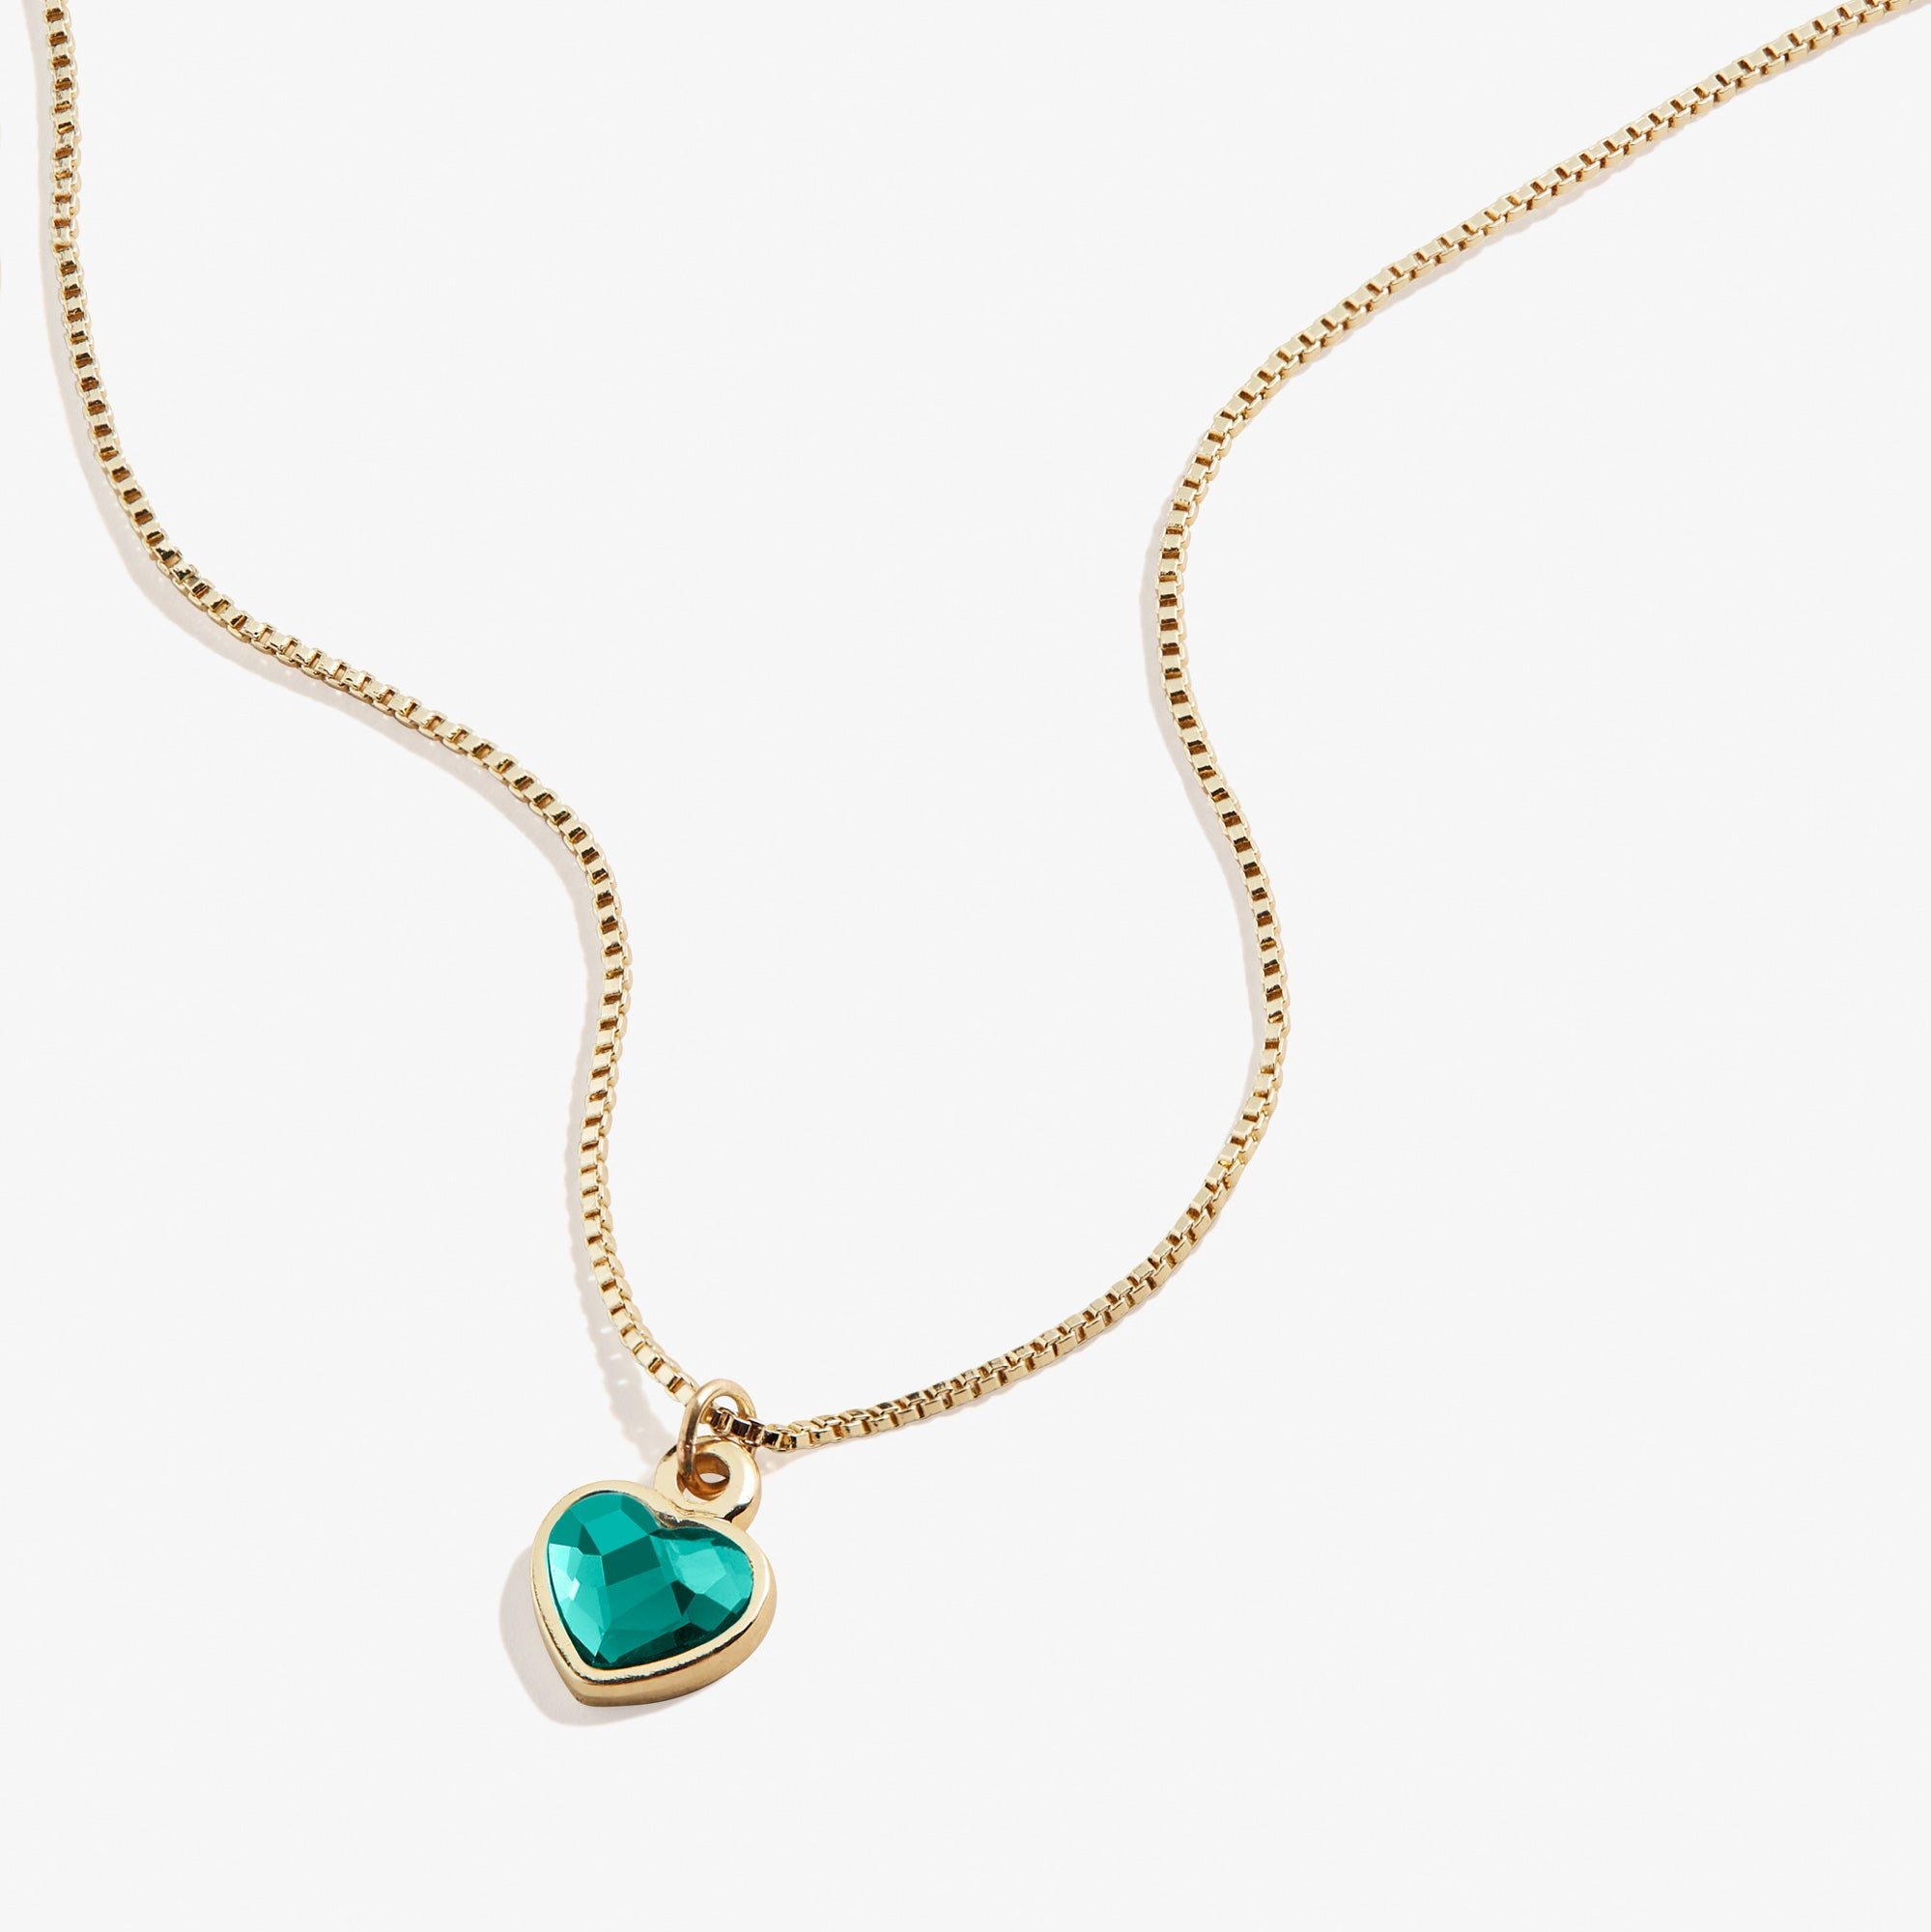 Emerald Heart Necklace, May Birthstone